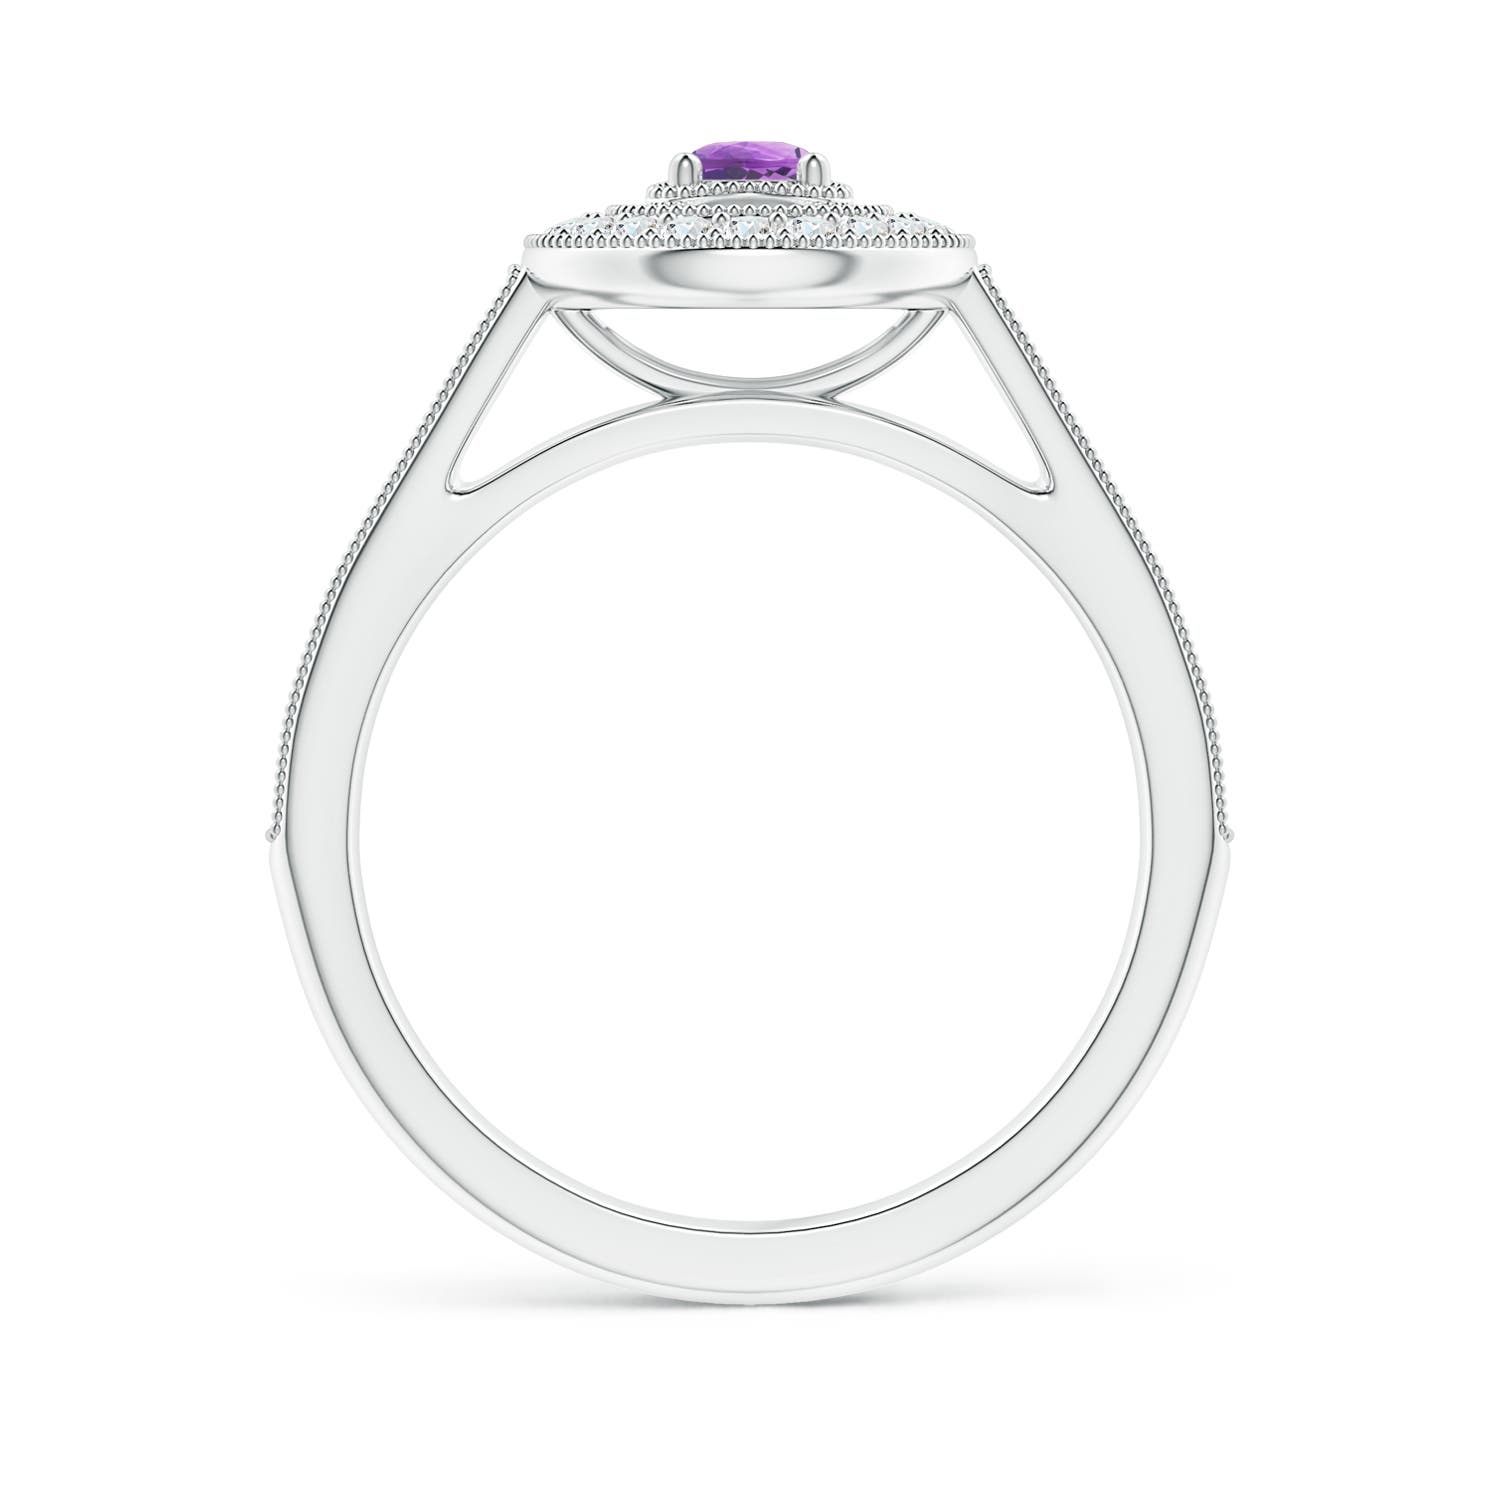 A - Amethyst / 0.46 CT / 14 KT White Gold